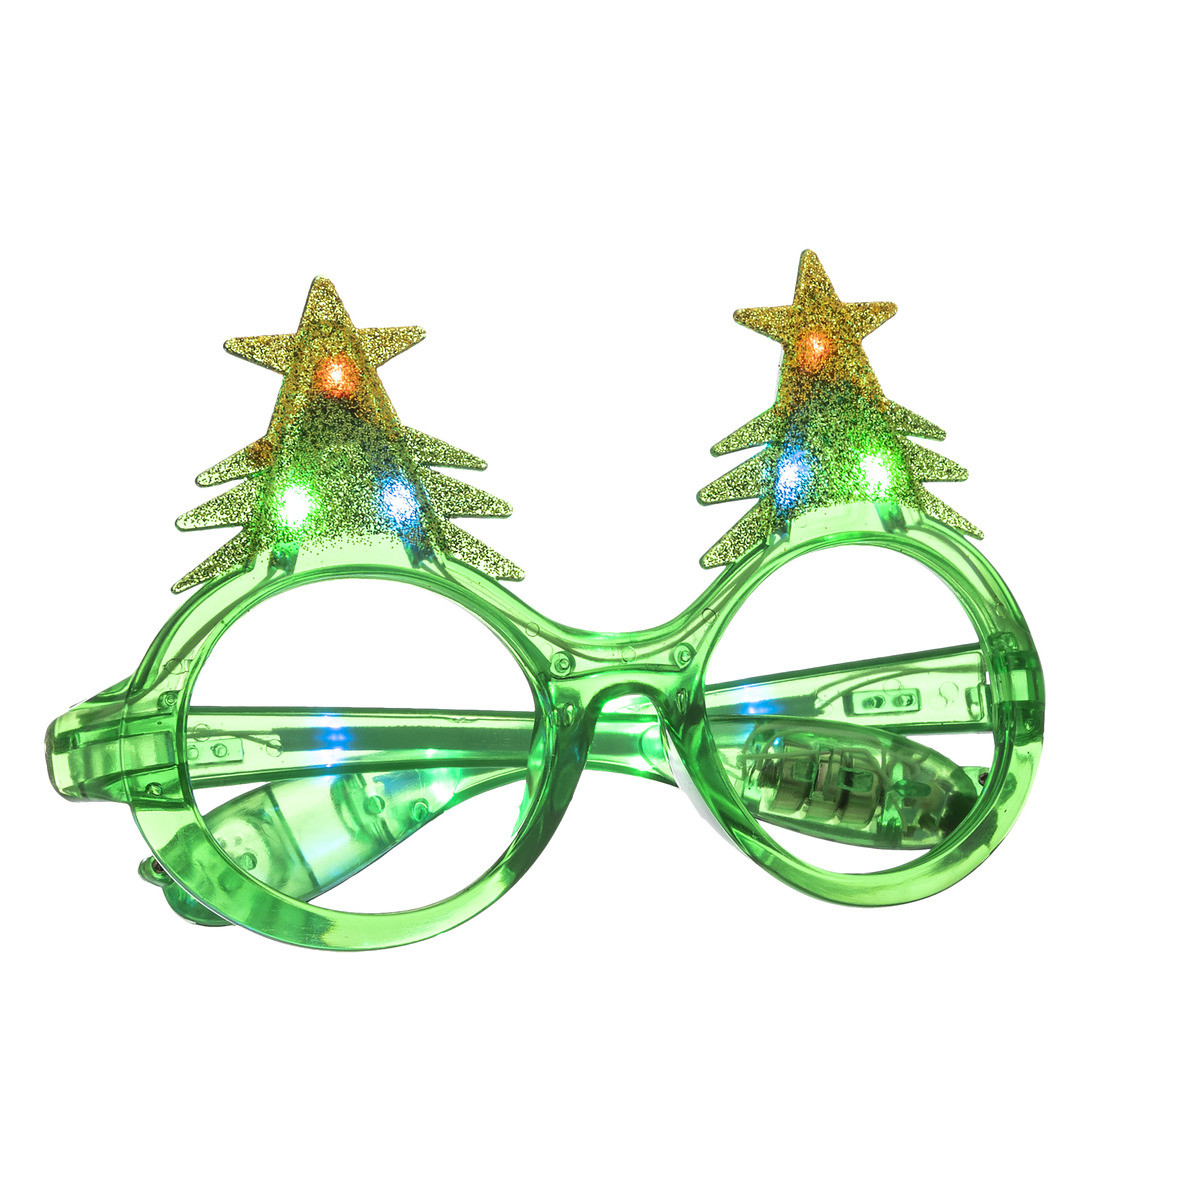 https://www.decomania.fr/740661-product_hd/lunettes-sapin-led-3-fonctions.jpg